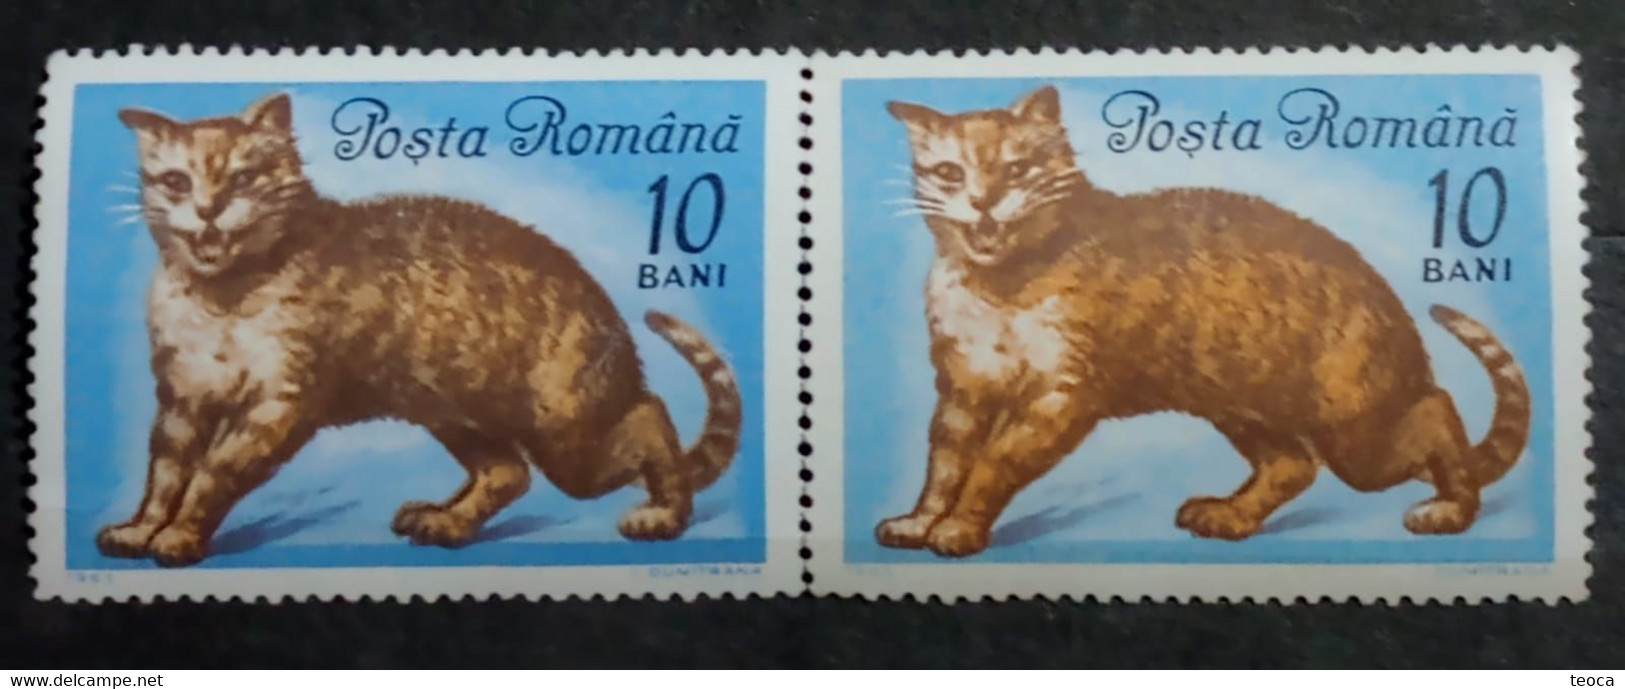 Stamps Errors Romania 1965 # Mi 2388 Printed With DIFFERENT COLOR  Misplaced Cat In Image Unused - Errors, Freaks & Oddities (EFO)